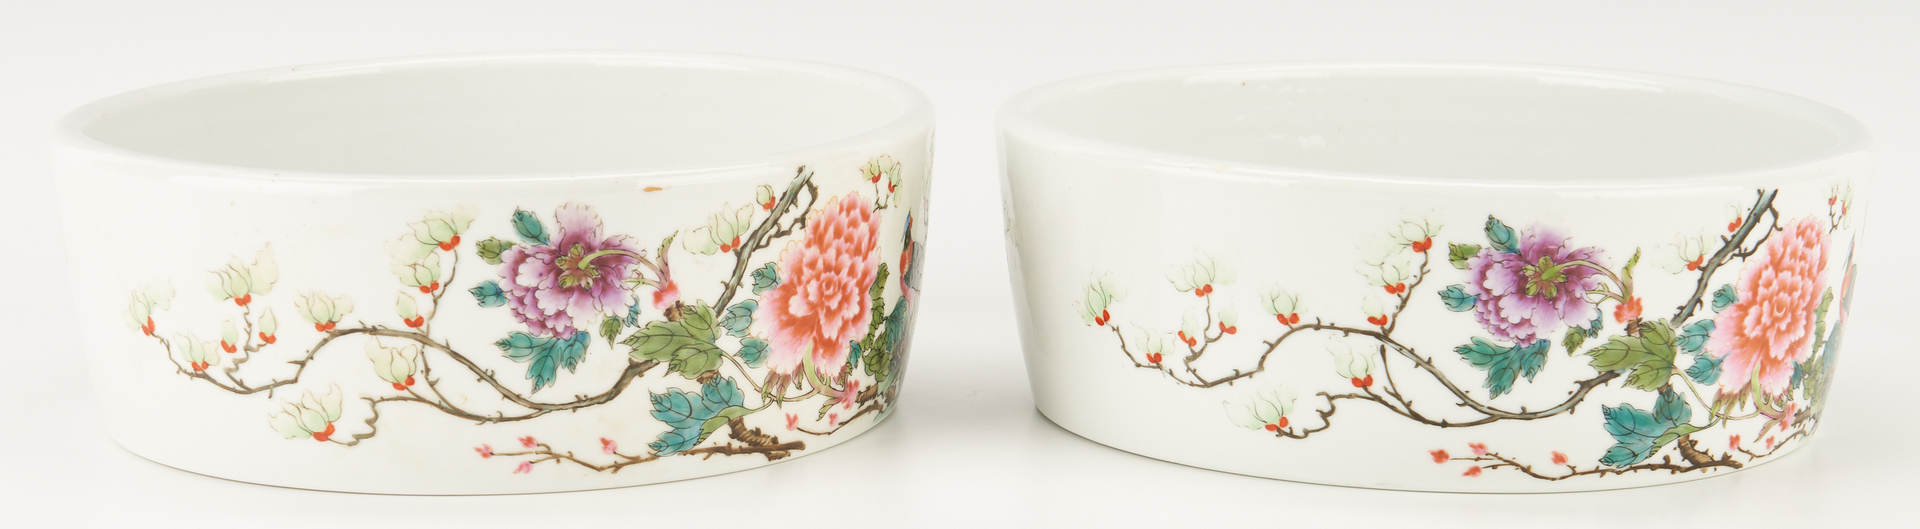 Lot 5: Pair of Chinese Famille Rose Porcelain "Narcissus" Bowls